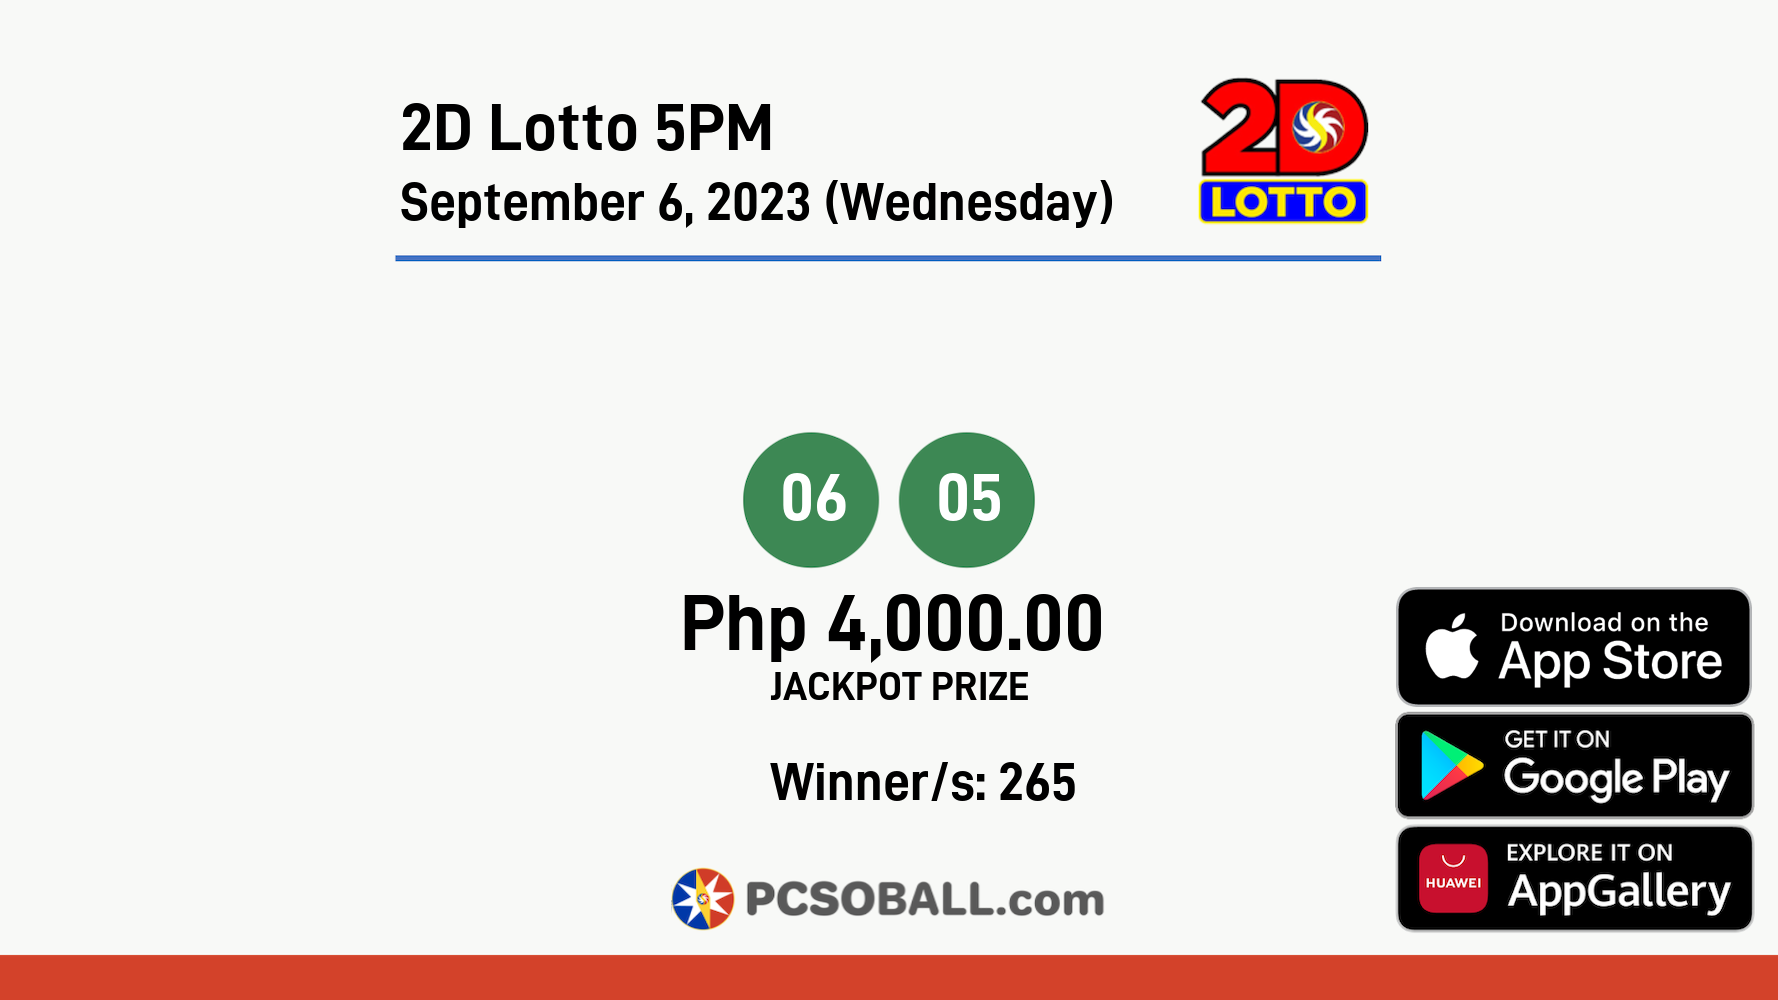 2D Lotto 5PM September 6, 2023 (Wednesday) Result